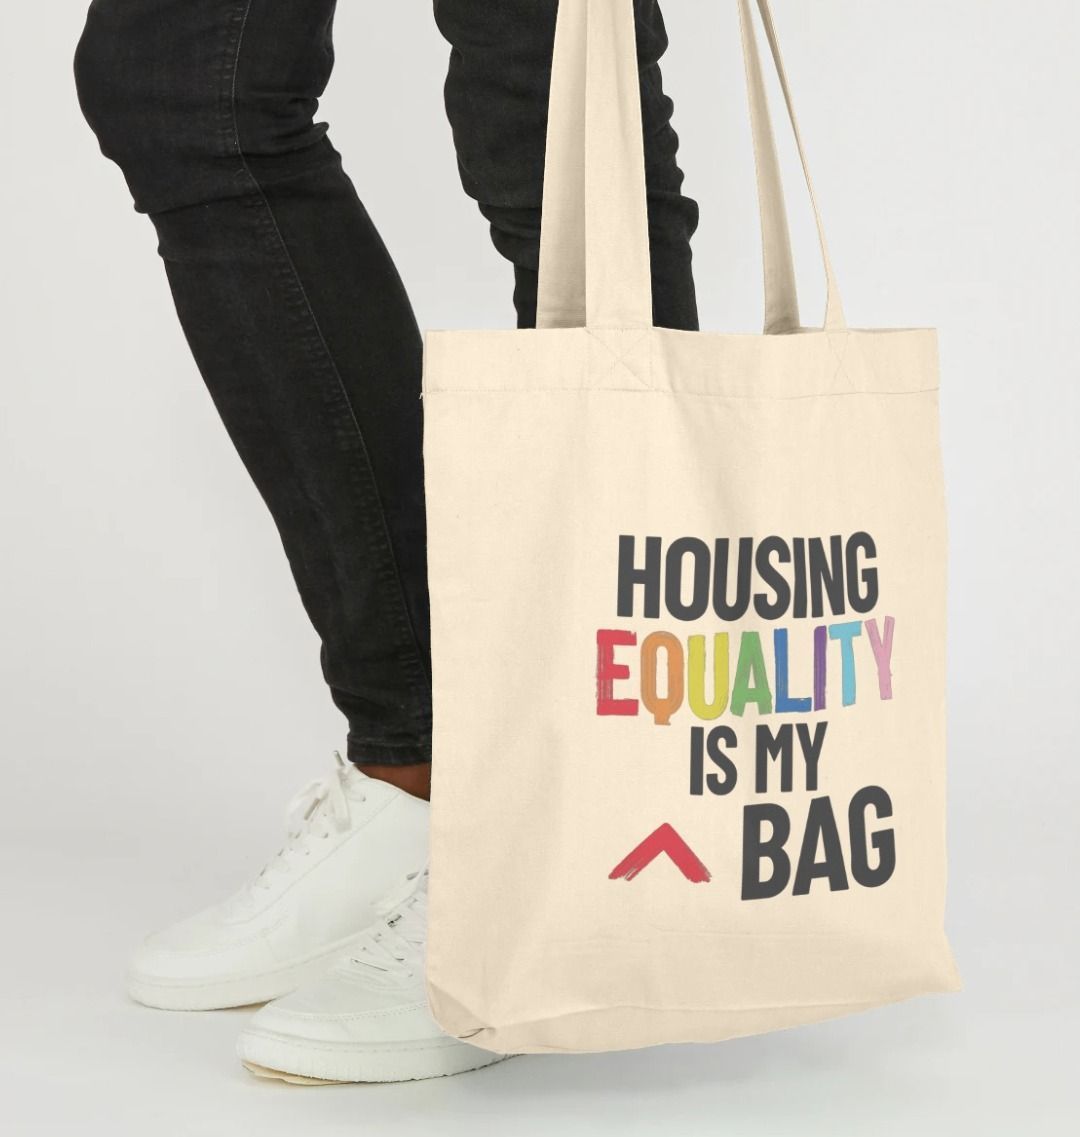 natural canvas colour tote bag with bold slogan "housing equality is my bag" the word equality is in the LGBTQ+ flag colours and the rest of text in black bold lettering